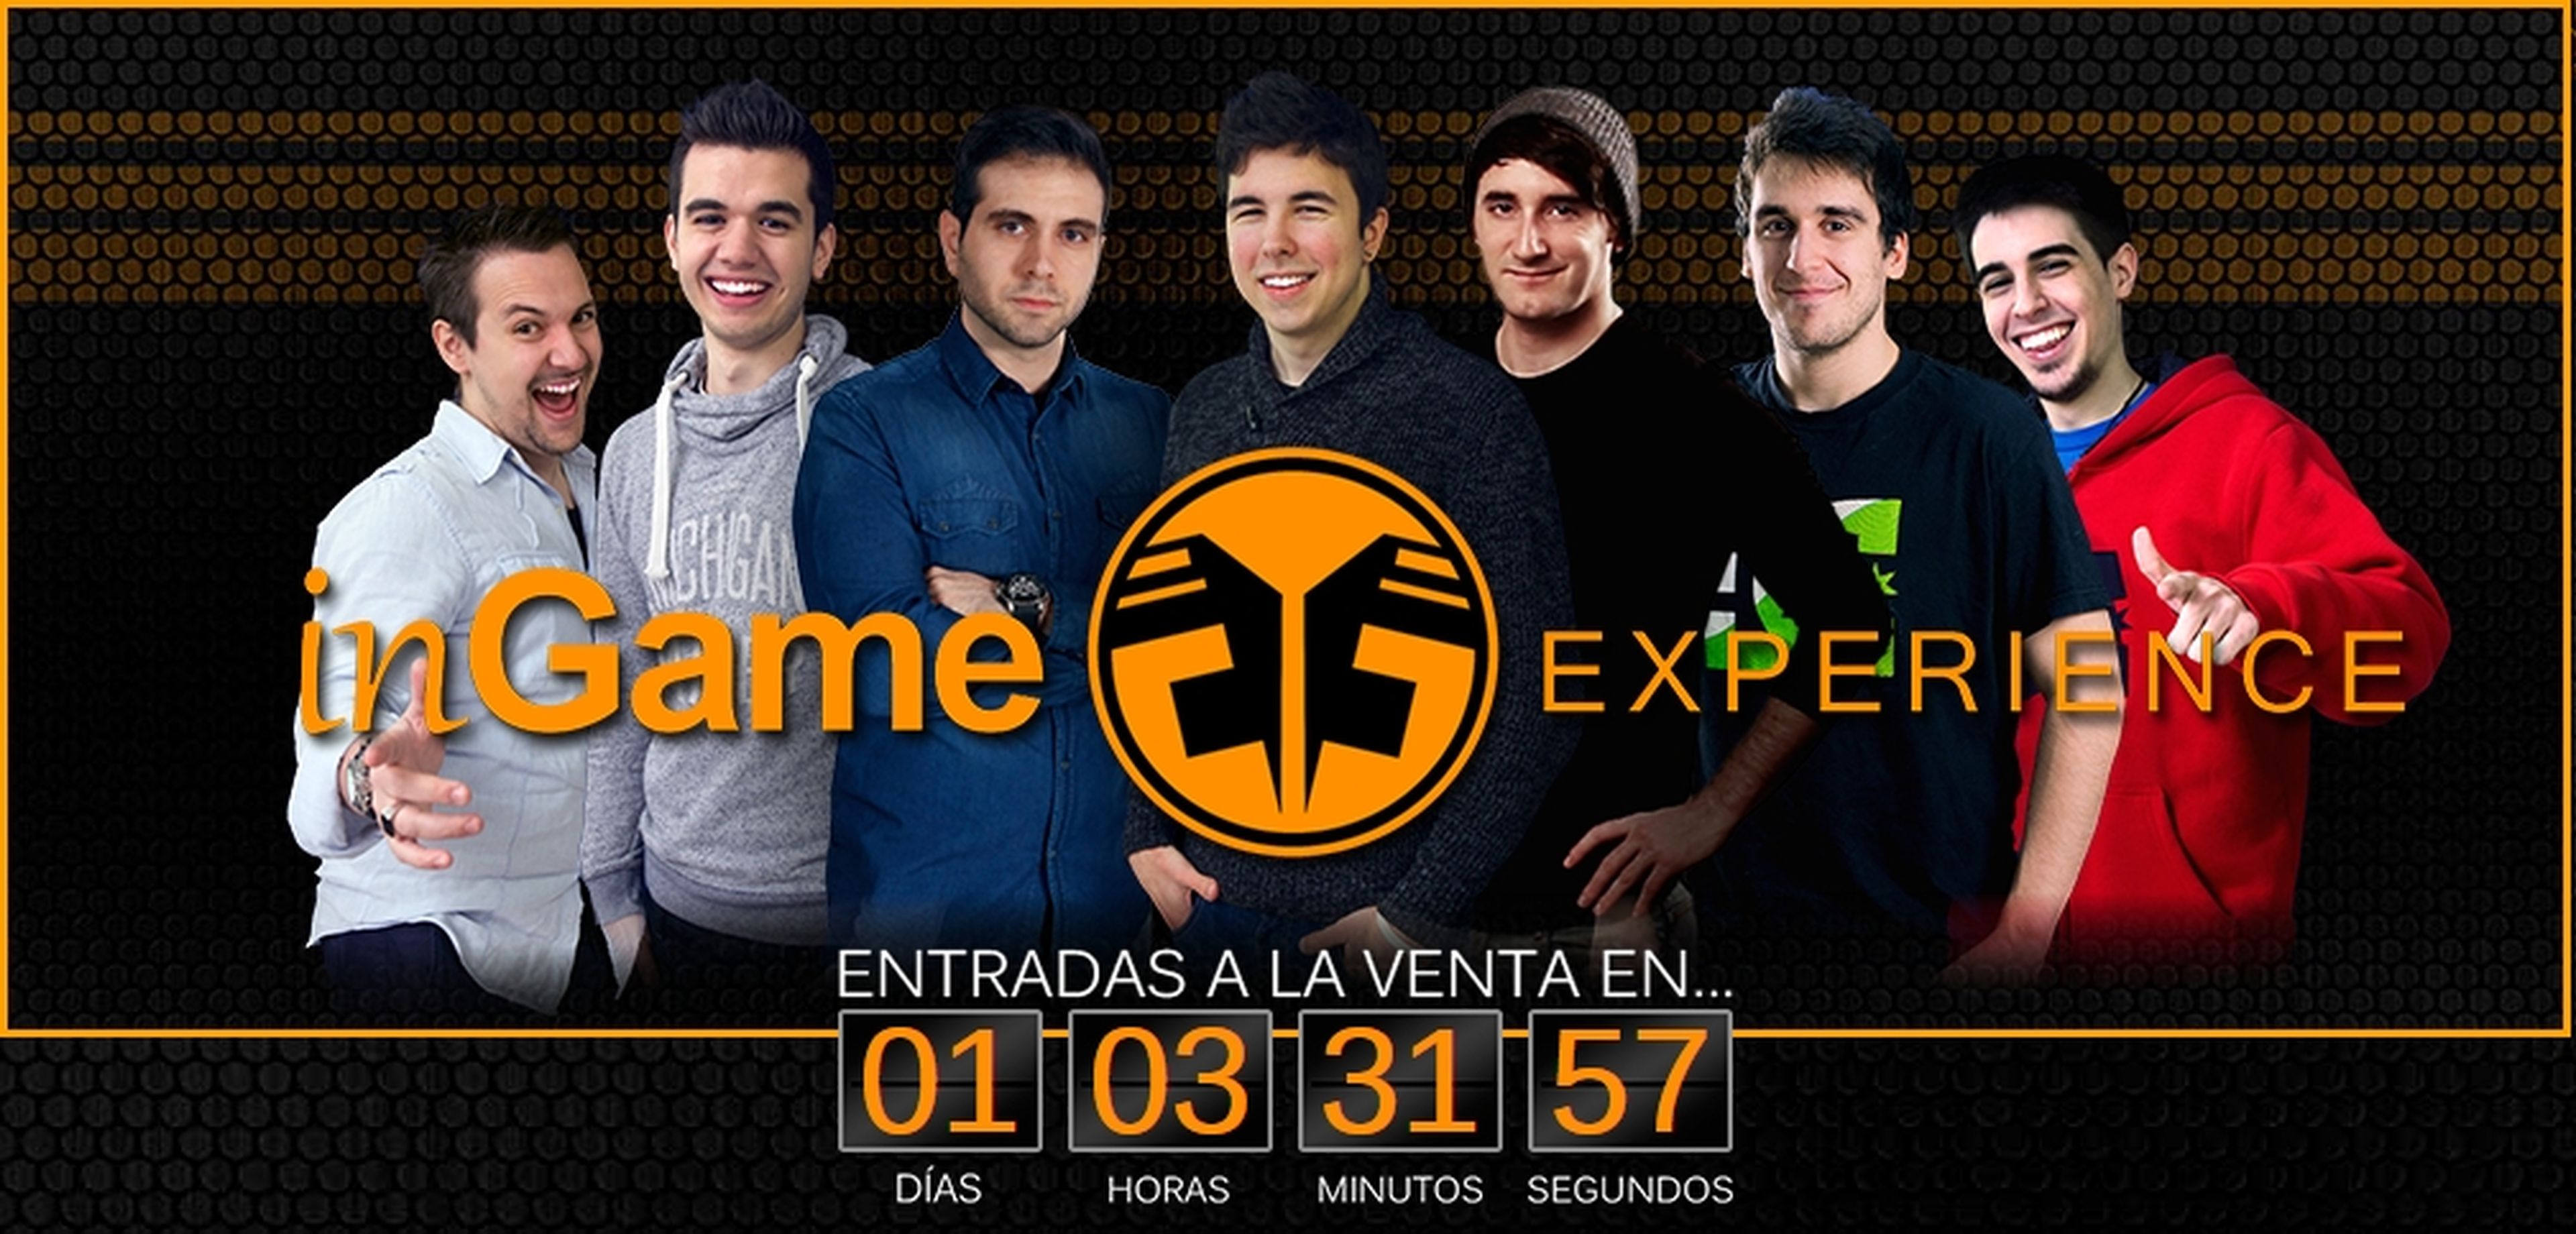 Conoce a tus YouTubers favoritos en inGame Experience